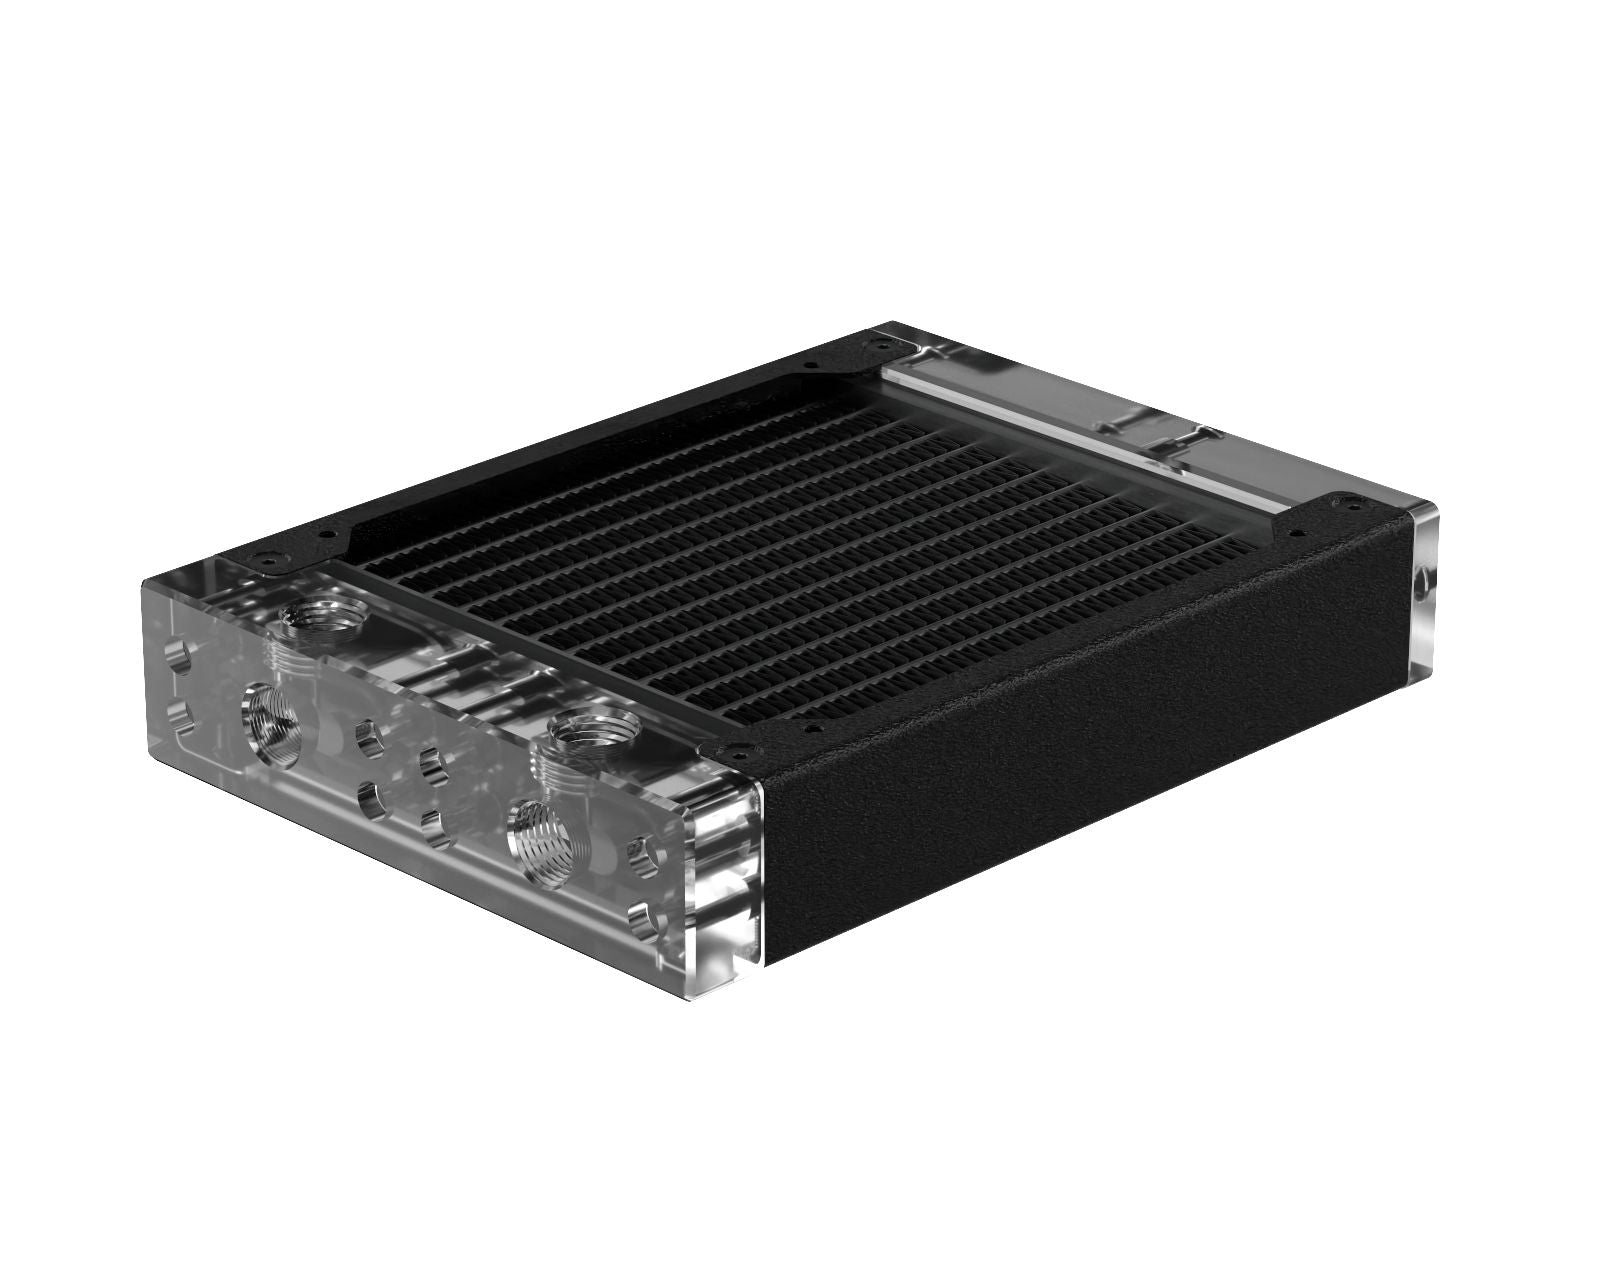 PrimoChill 120SL (30mm) EXIMO Modular Radiator, Clear Acrylic, 1x120mm, Single Fan (R-SL-A12) Available in 20+ Colors, Assembled in USA and Custom Watercooling Loop Ready - TX Matte Black